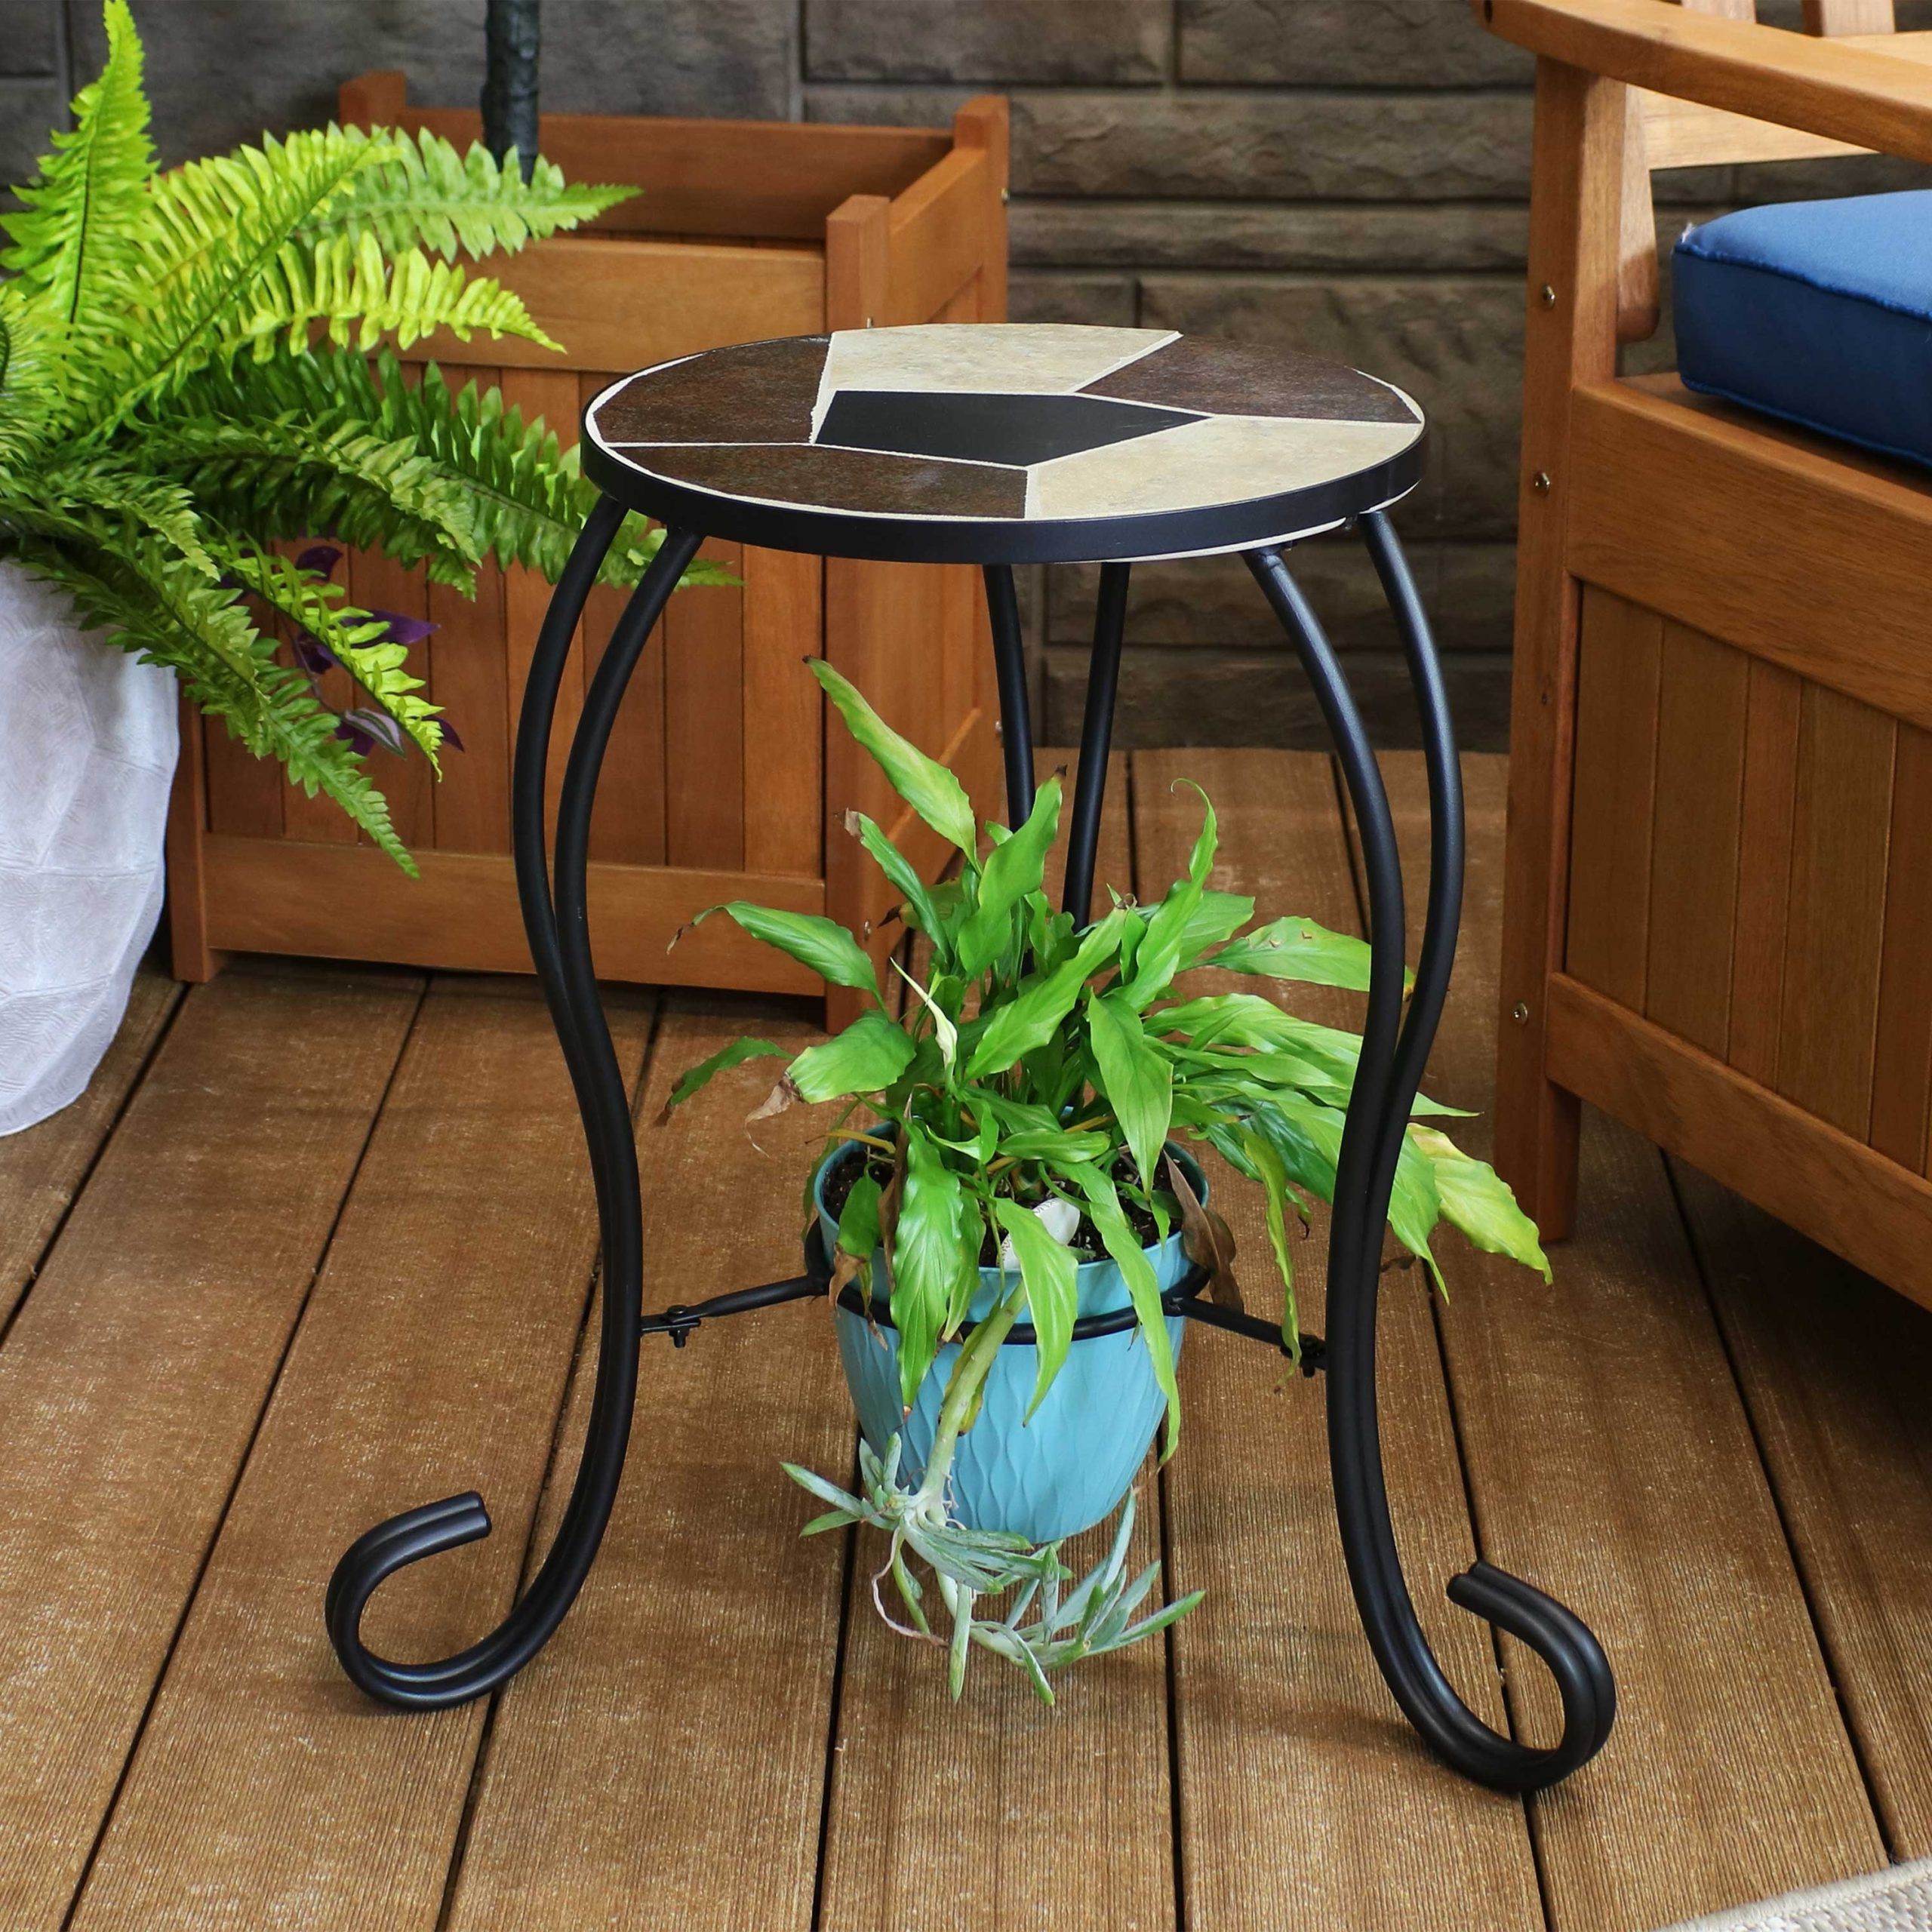 Well Liked Plant Stands With Side Table Throughout Sunnydaze 12 Inch Mosaic Ceramic Tile Side Table/ Plant Stand – Steel Frame  – Overstock –  (View 14 of 15)